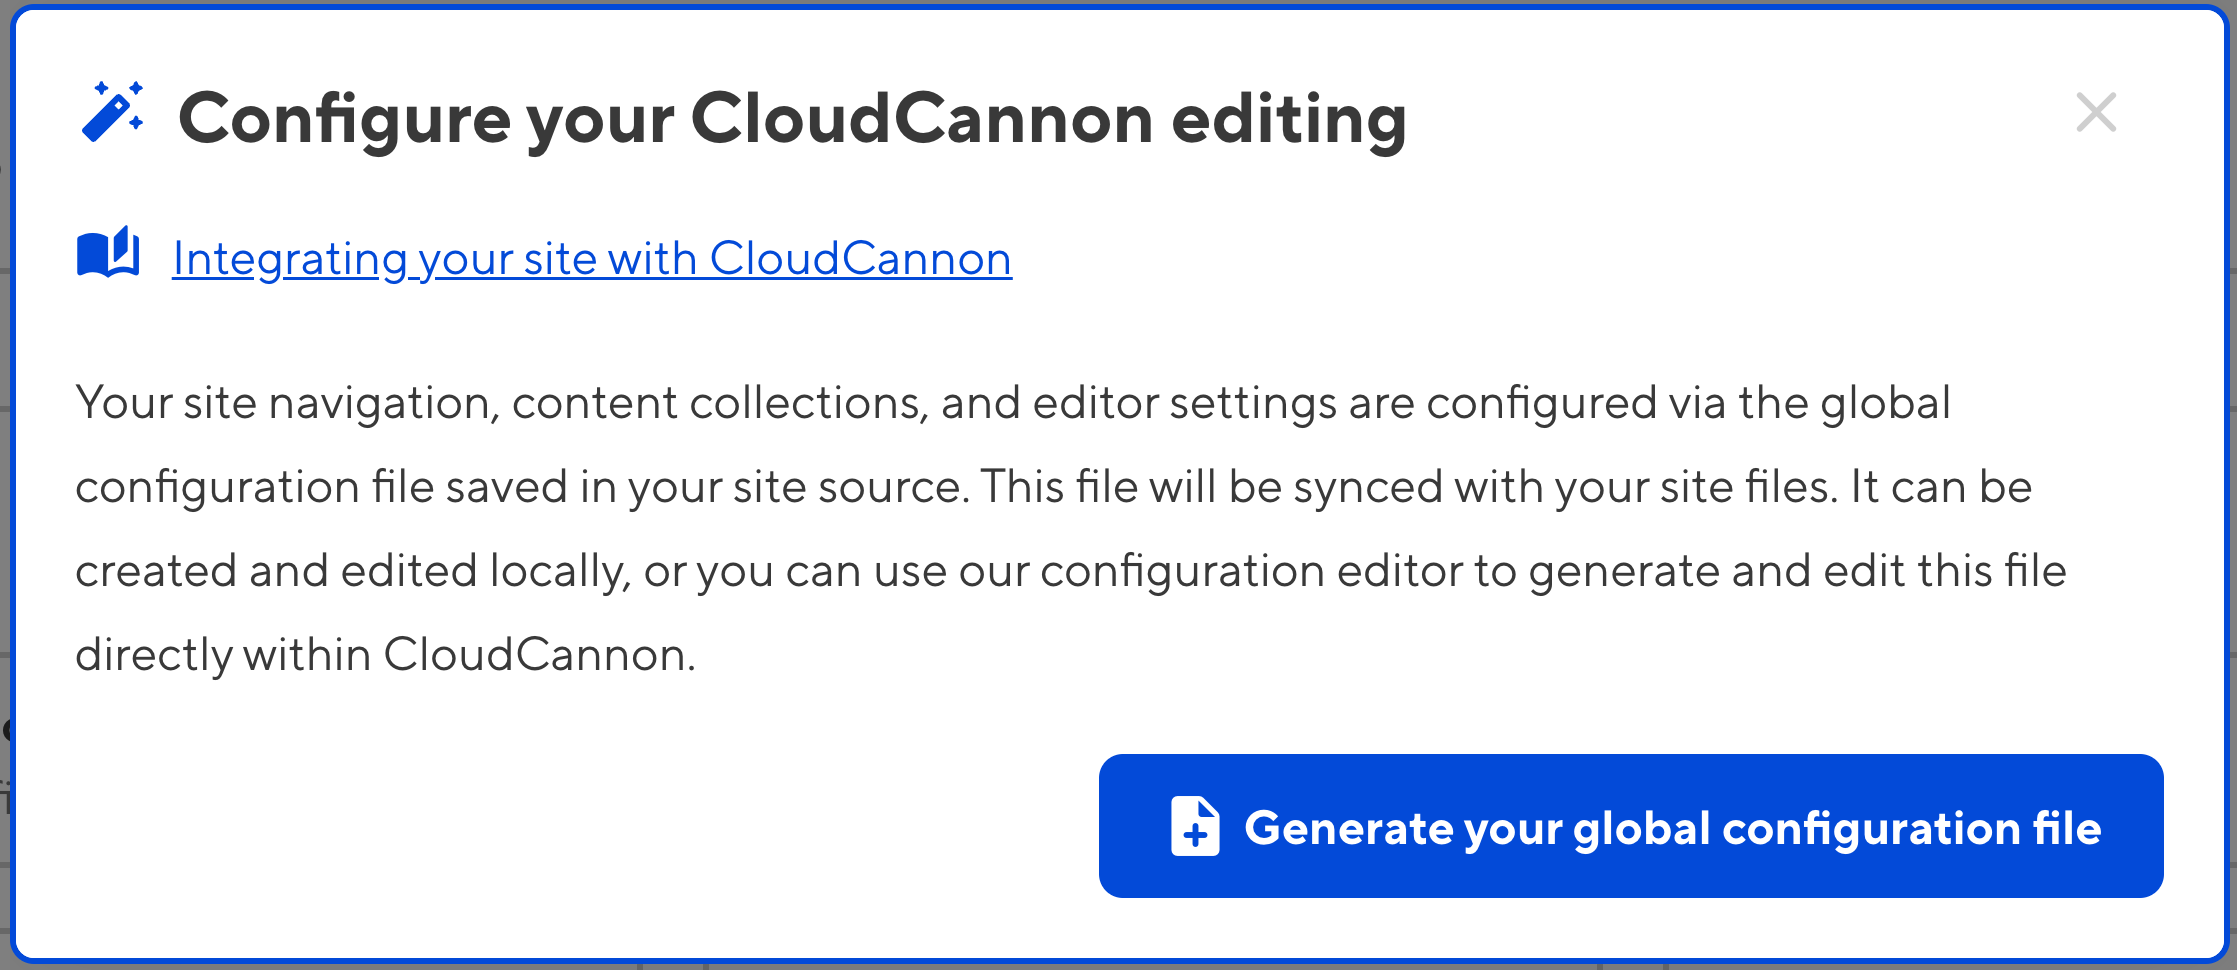 Click Generate your global configuration file to create your file